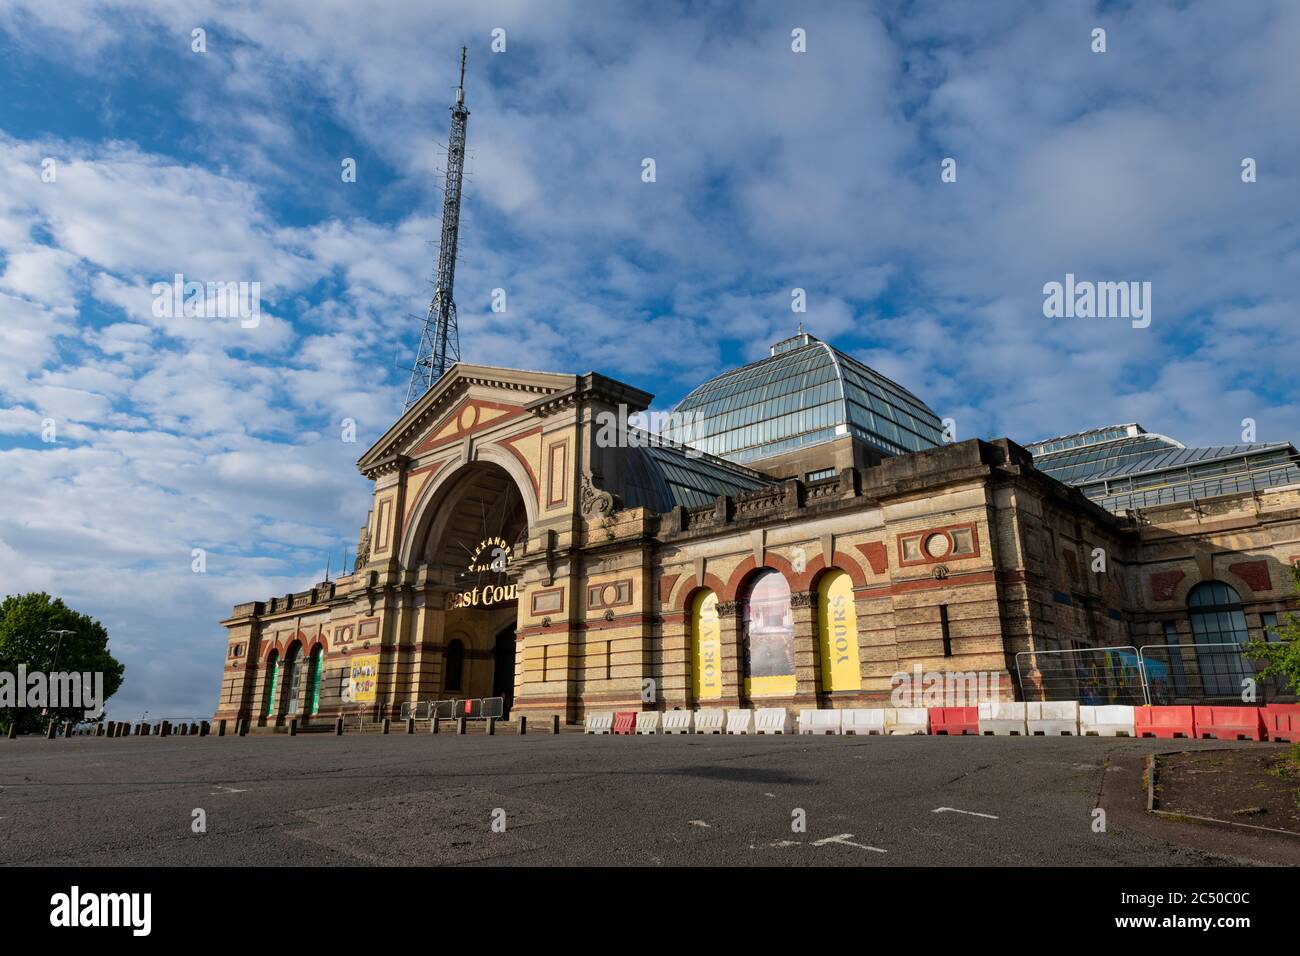 A view of the East Court of Alexandra Palace on a beautiful day. A historical north London landmark and successful events and sports venue. Stock Photo